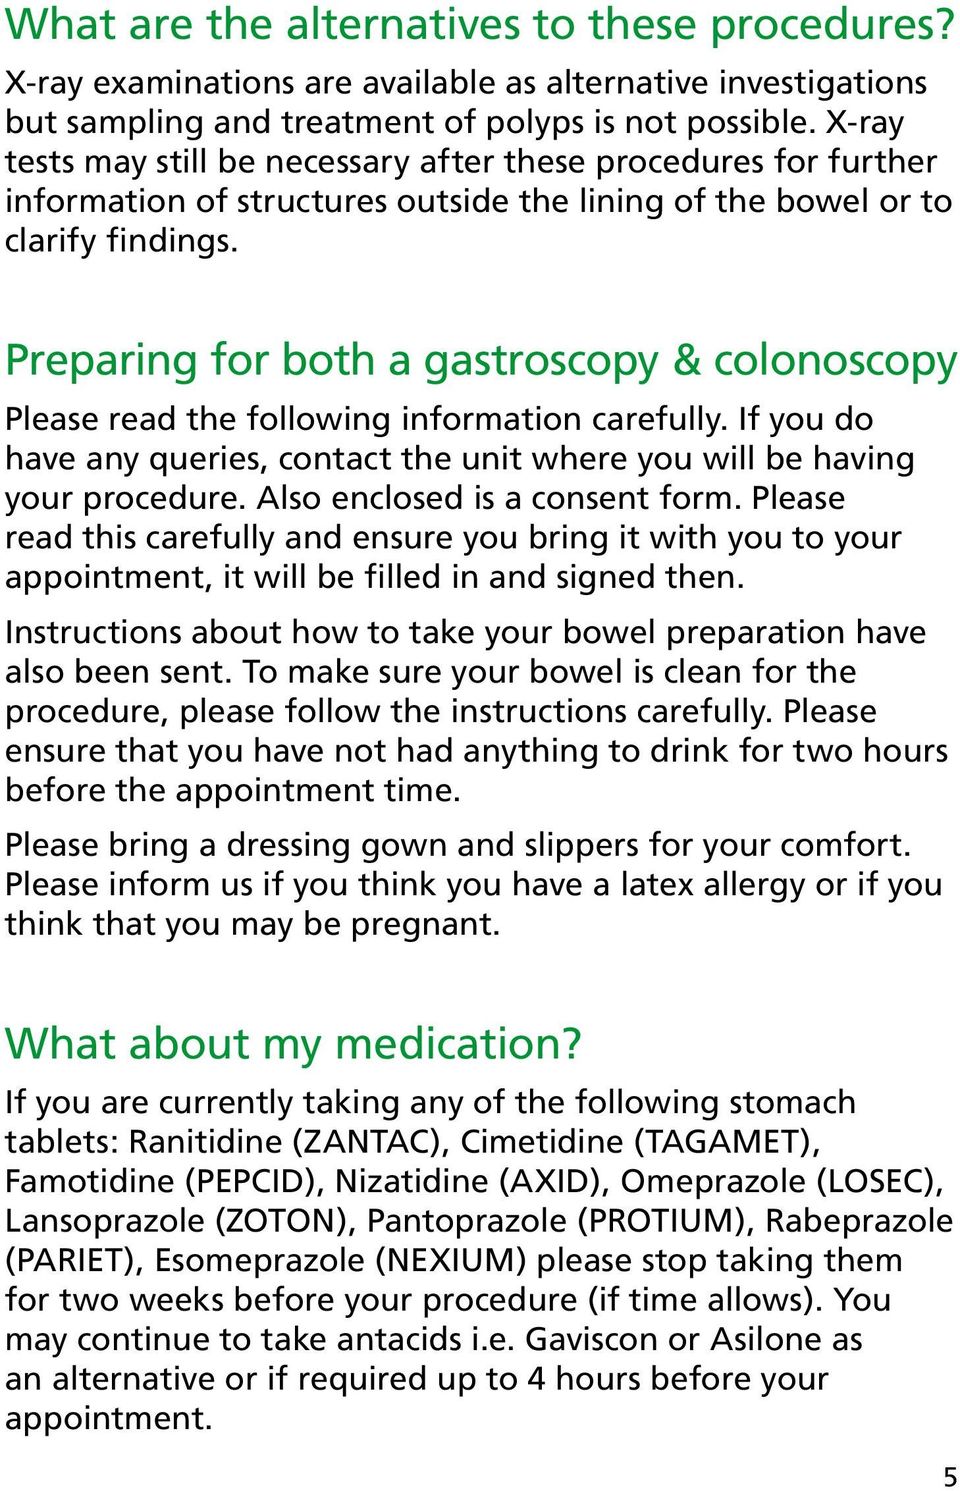 Preparing for both a gastroscopy & colonoscopy Please read the following information carefully. If you do have any queries, contact the unit where you will be having your procedure.